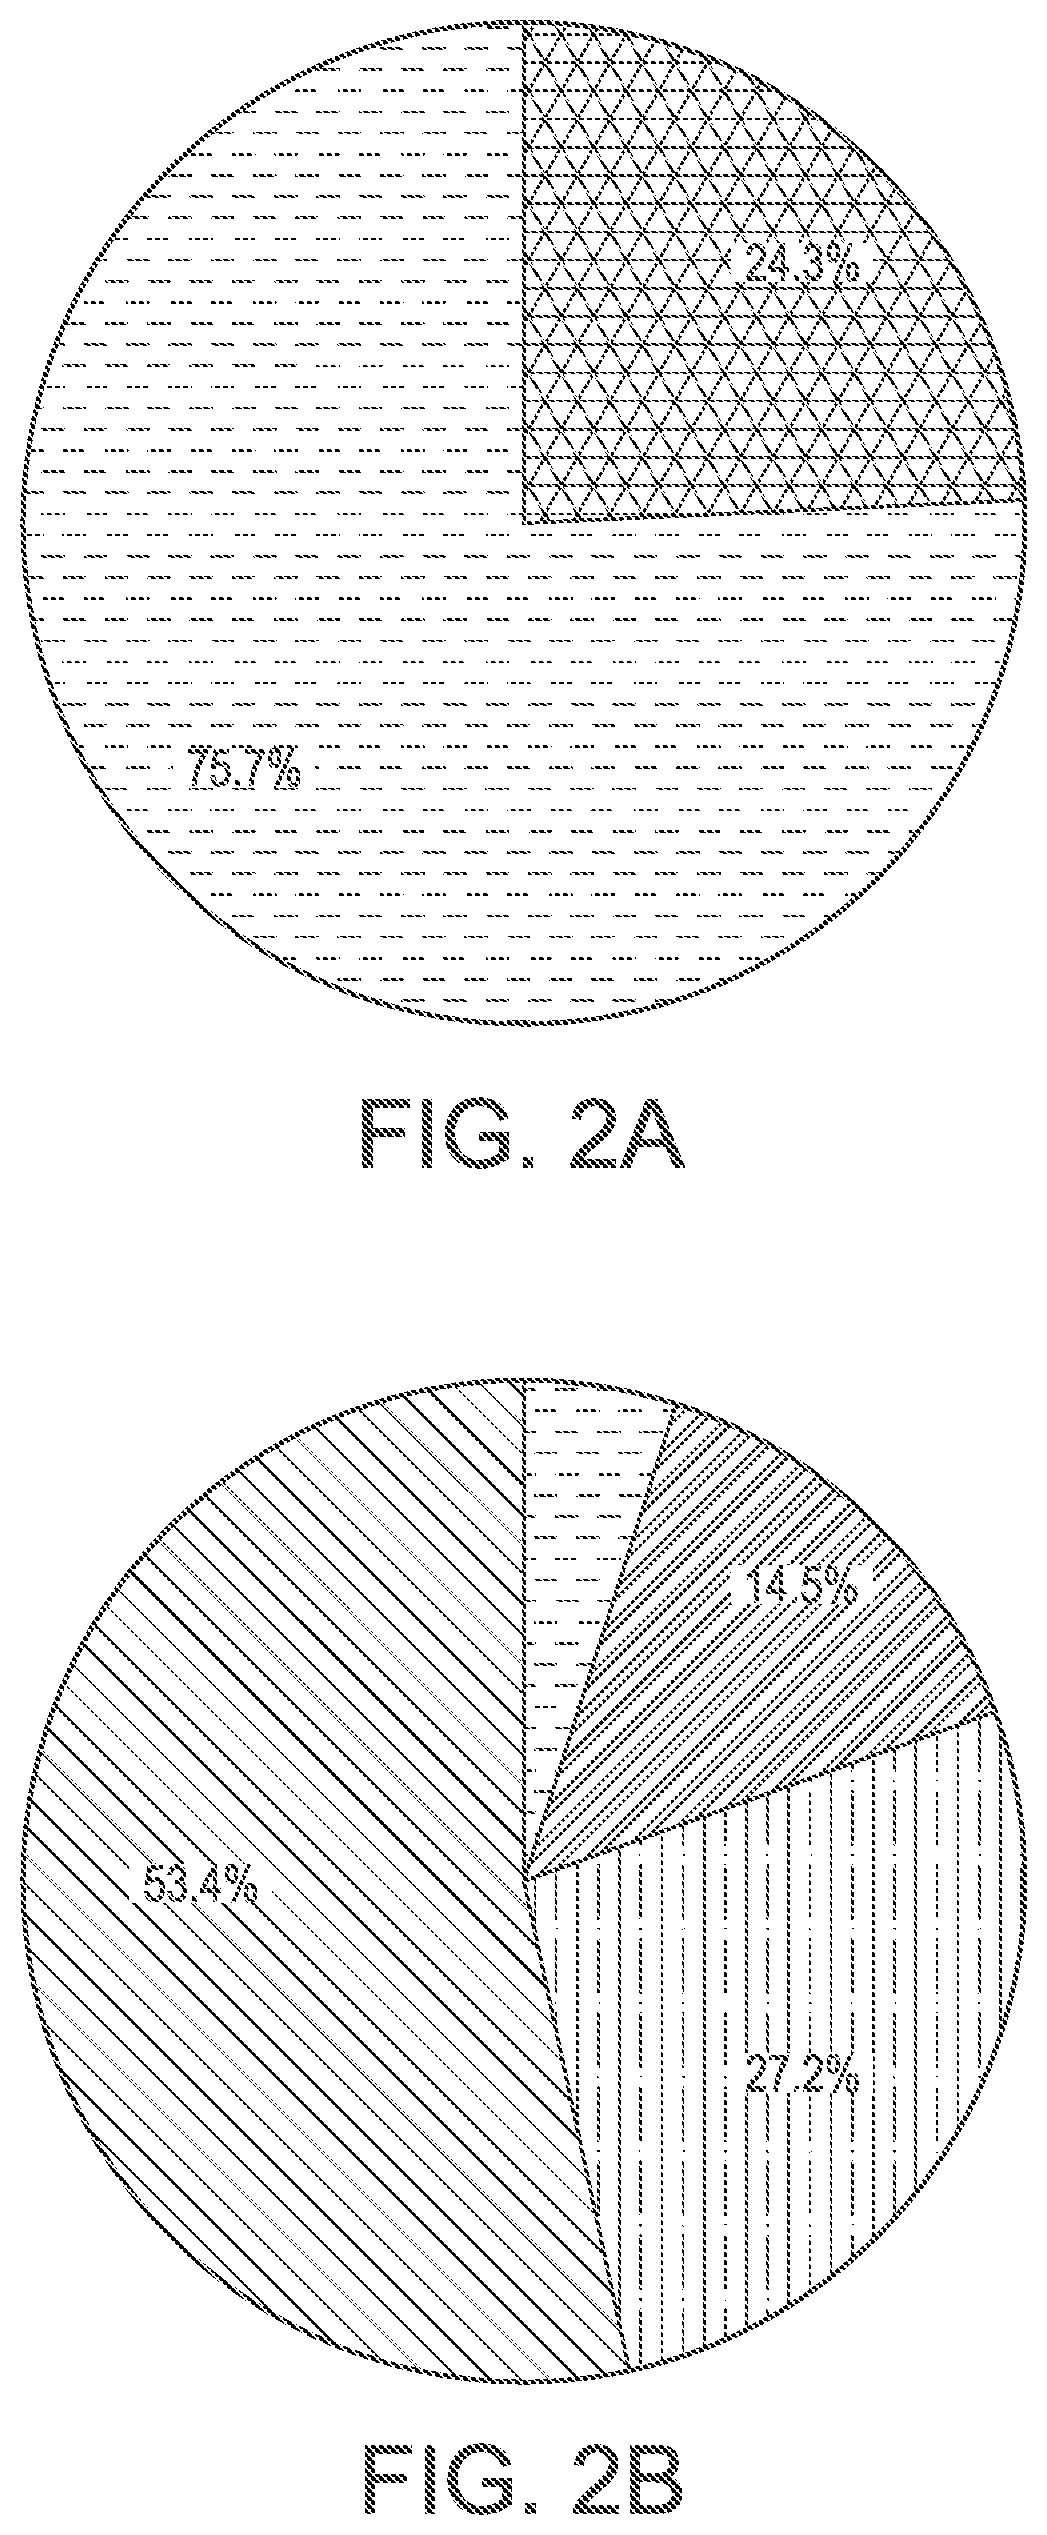 Method for Compiling A Genomic Database for A Complex Disease And Method for Using The Compiled Database to Identify Genetic Patterns in The Complex Disease to Establish Diagnostic Biomarkers